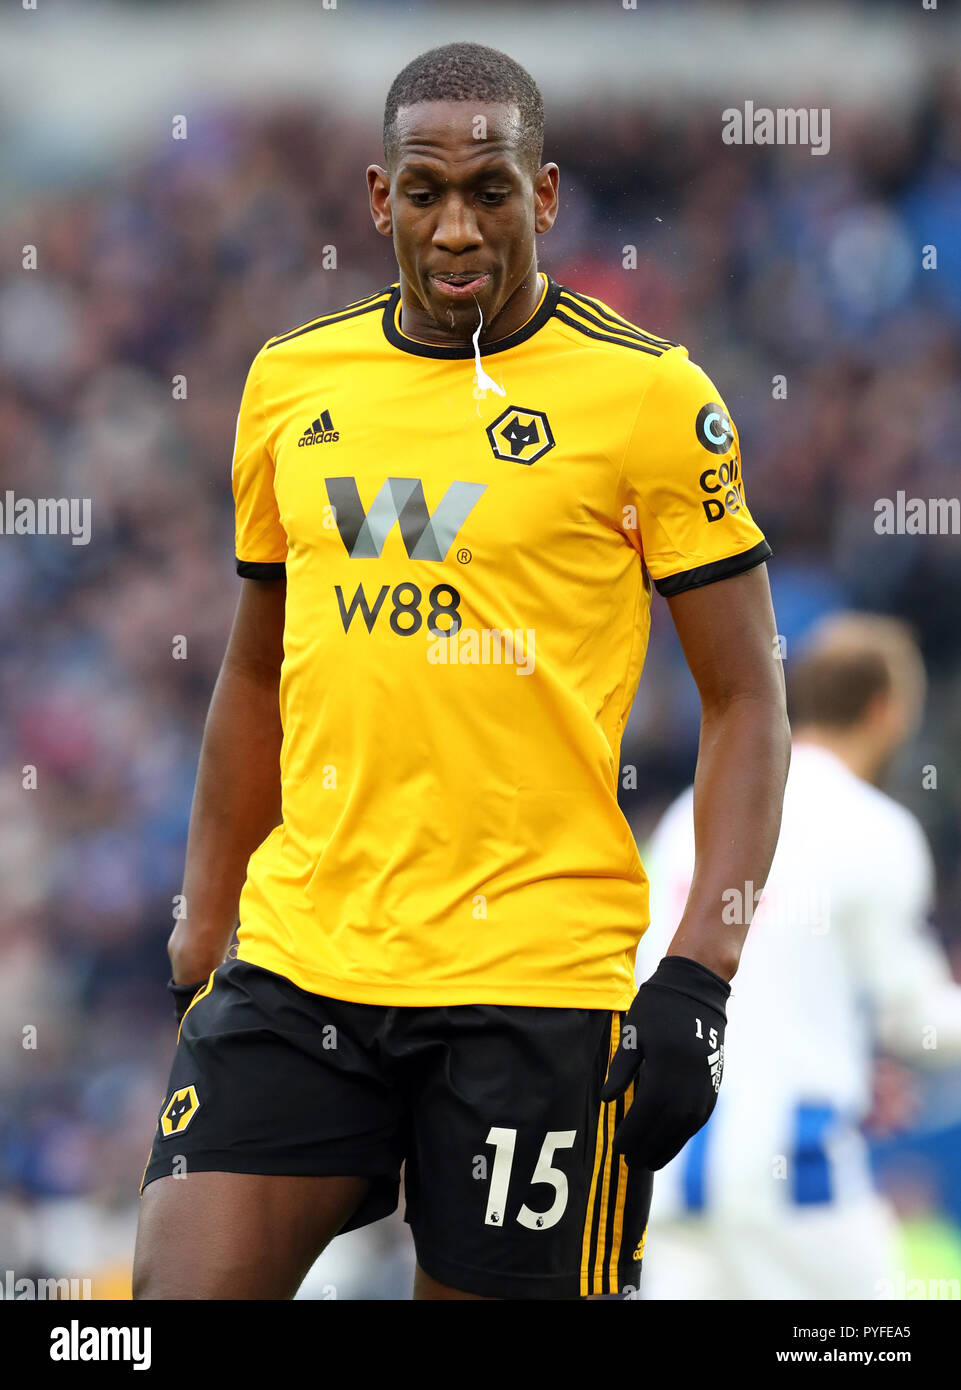 Wolverhampton Wanderers' Willy Boly during the Premier League match at The AMEX Stadium, Brighton. PRESS ASSOCIATION Photo. Picture date: Saturday October 27, 2018. See PA story SOCCER Brighton. Photo credit should read: Gareth Fuller/PA Wire. RESTRICTIONS: No use with unauthorised audio, video, data, fixture lists, club/league logos or 'live' services. Online in-match use limited to 120 images, no video emulation. No use in betting, games or single club/league/player publications. Stock Photo